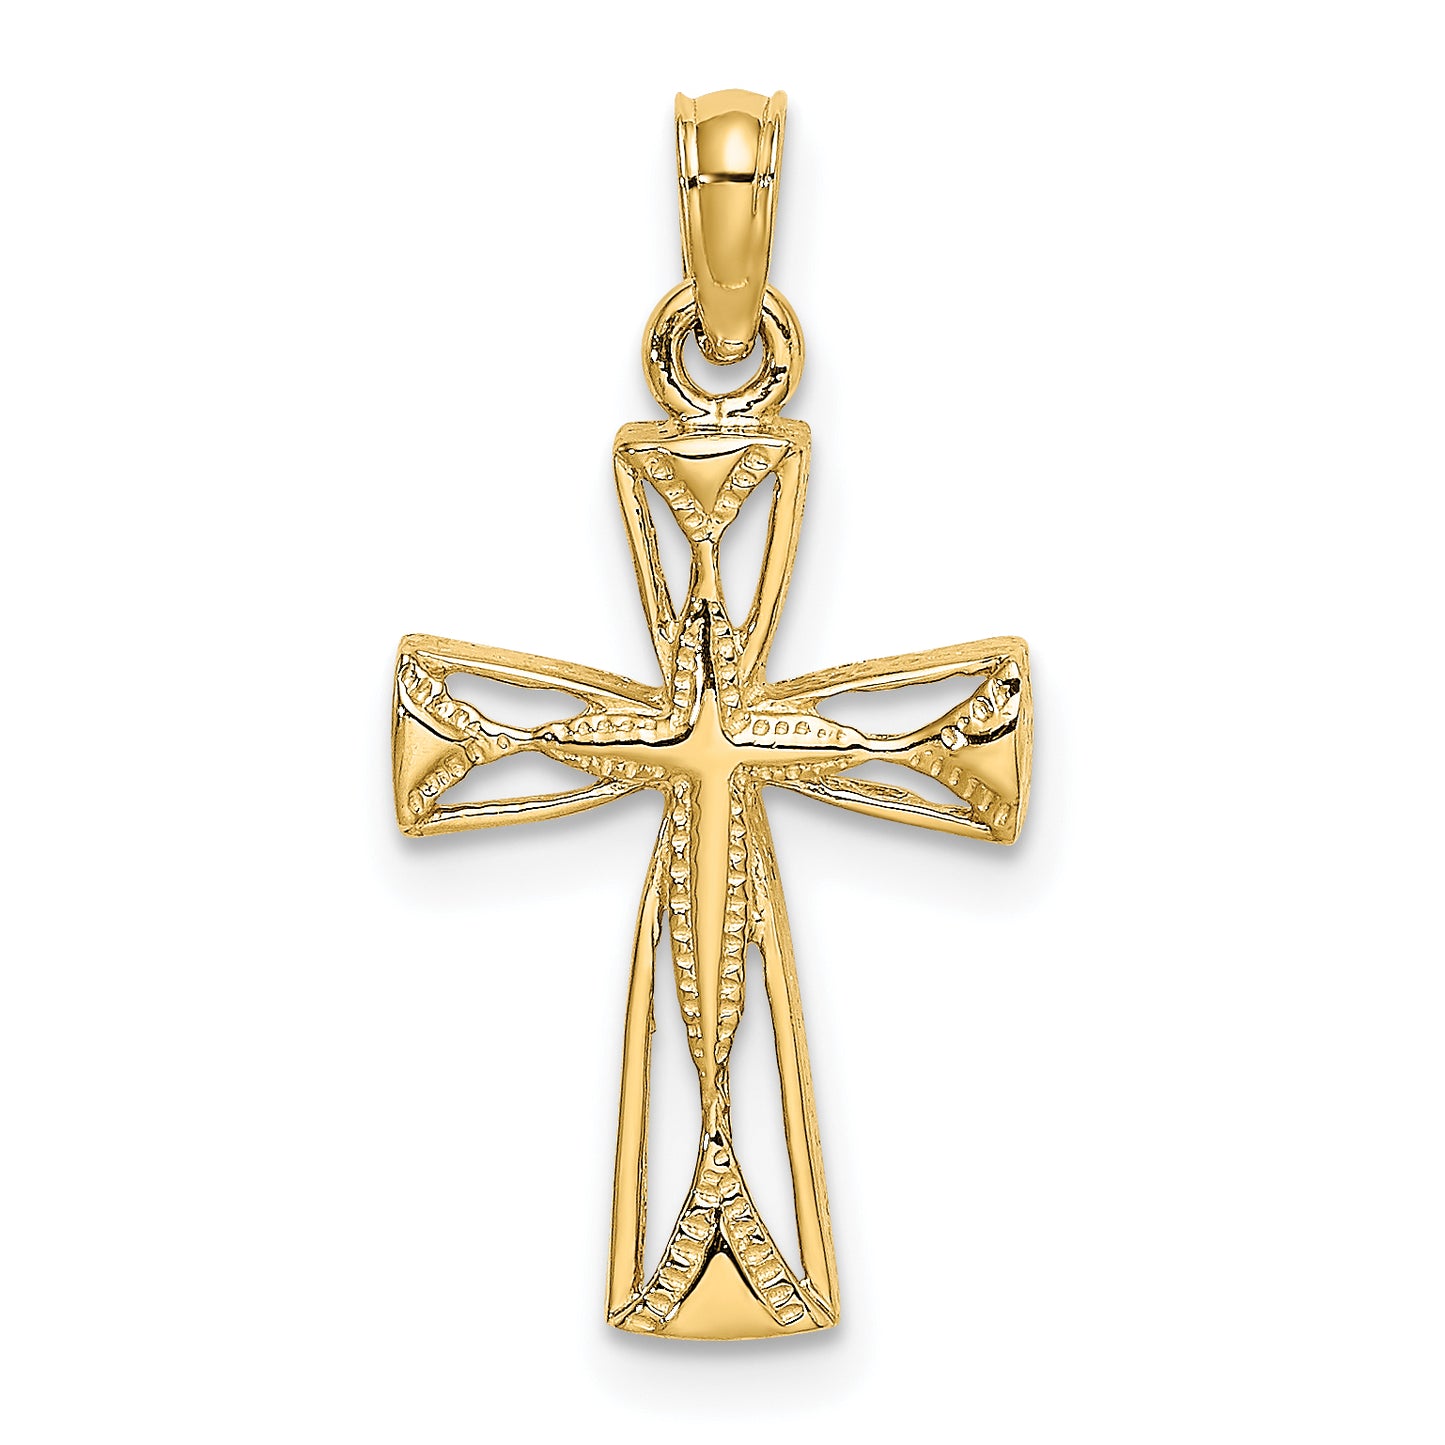 10K Cut-Out Cross with Triangle Ends Charm